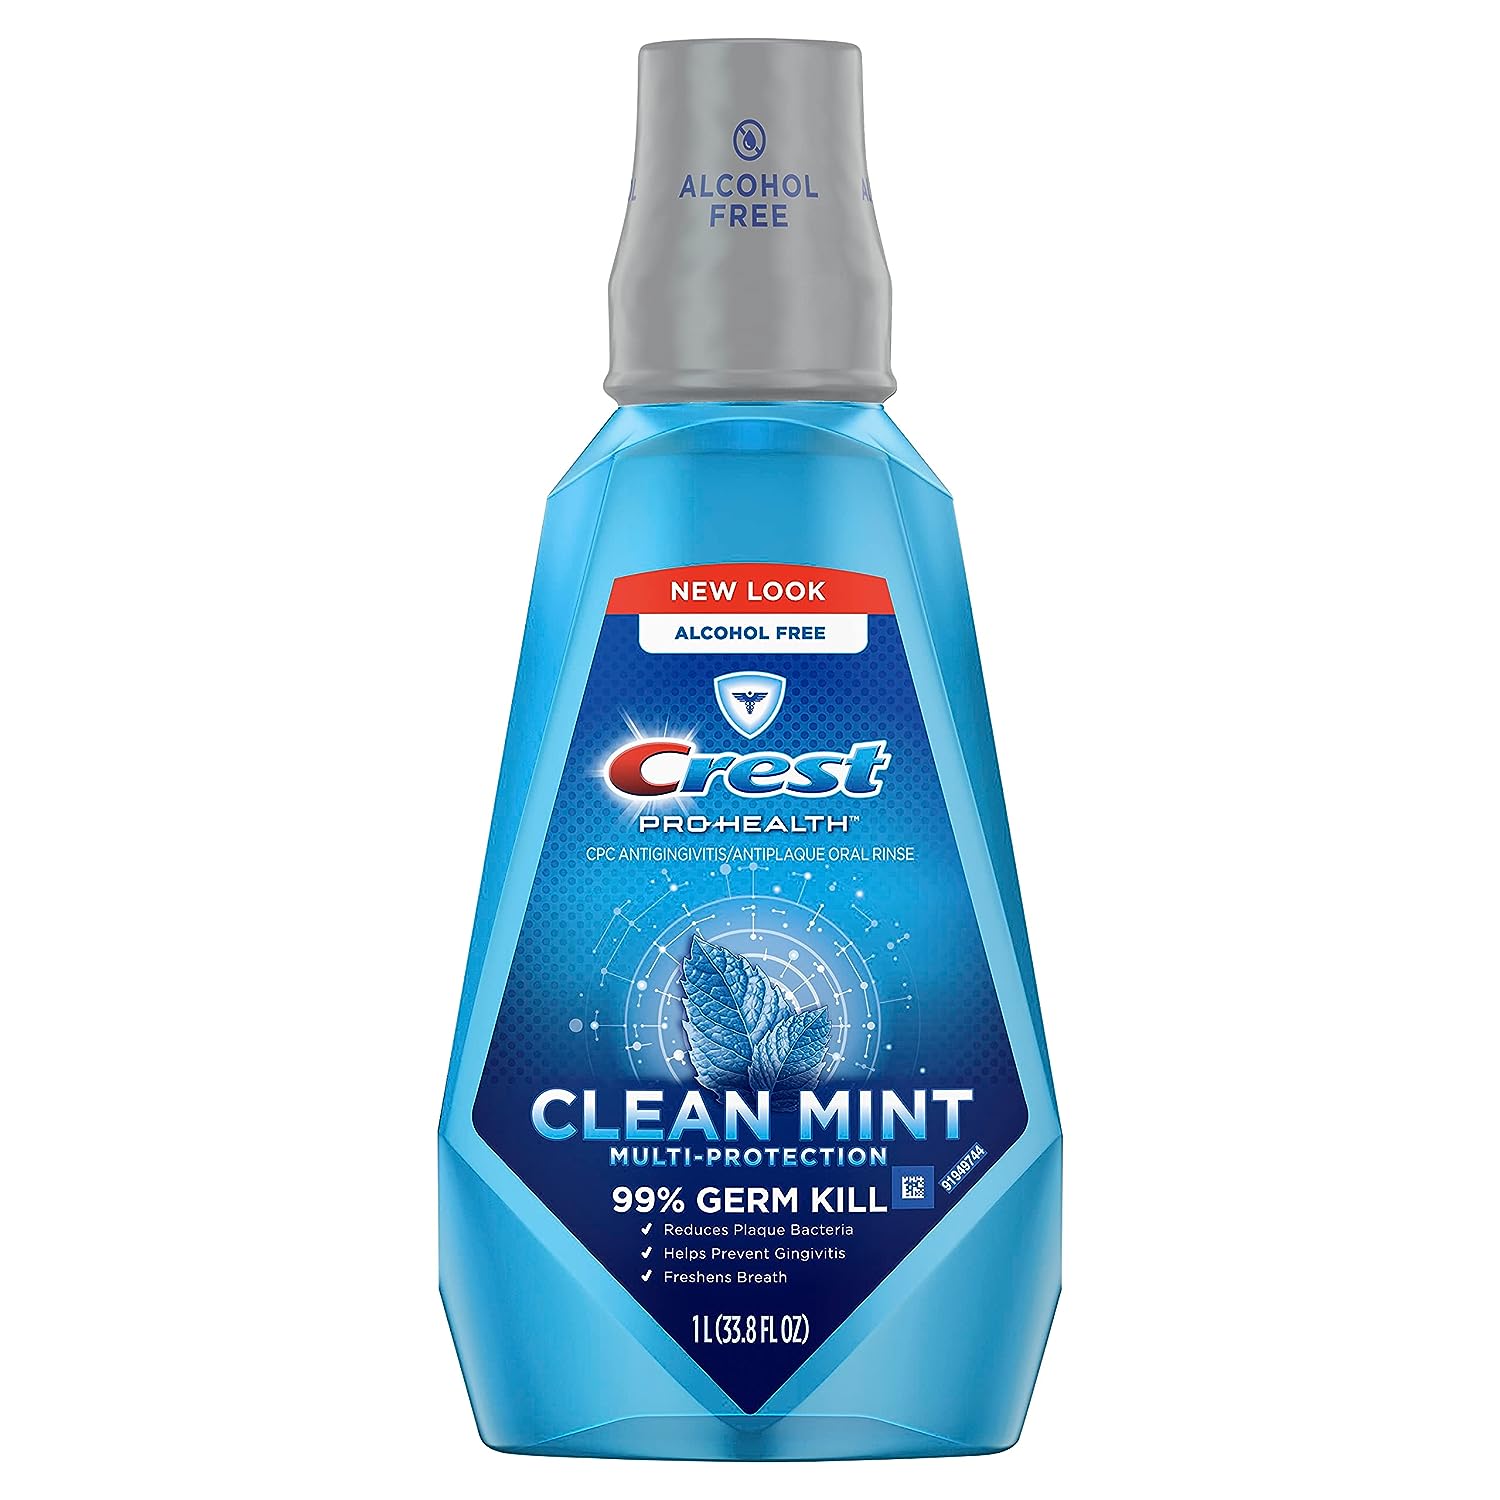 Crest Pro Health Multi-Protection Mouthwash with CPC